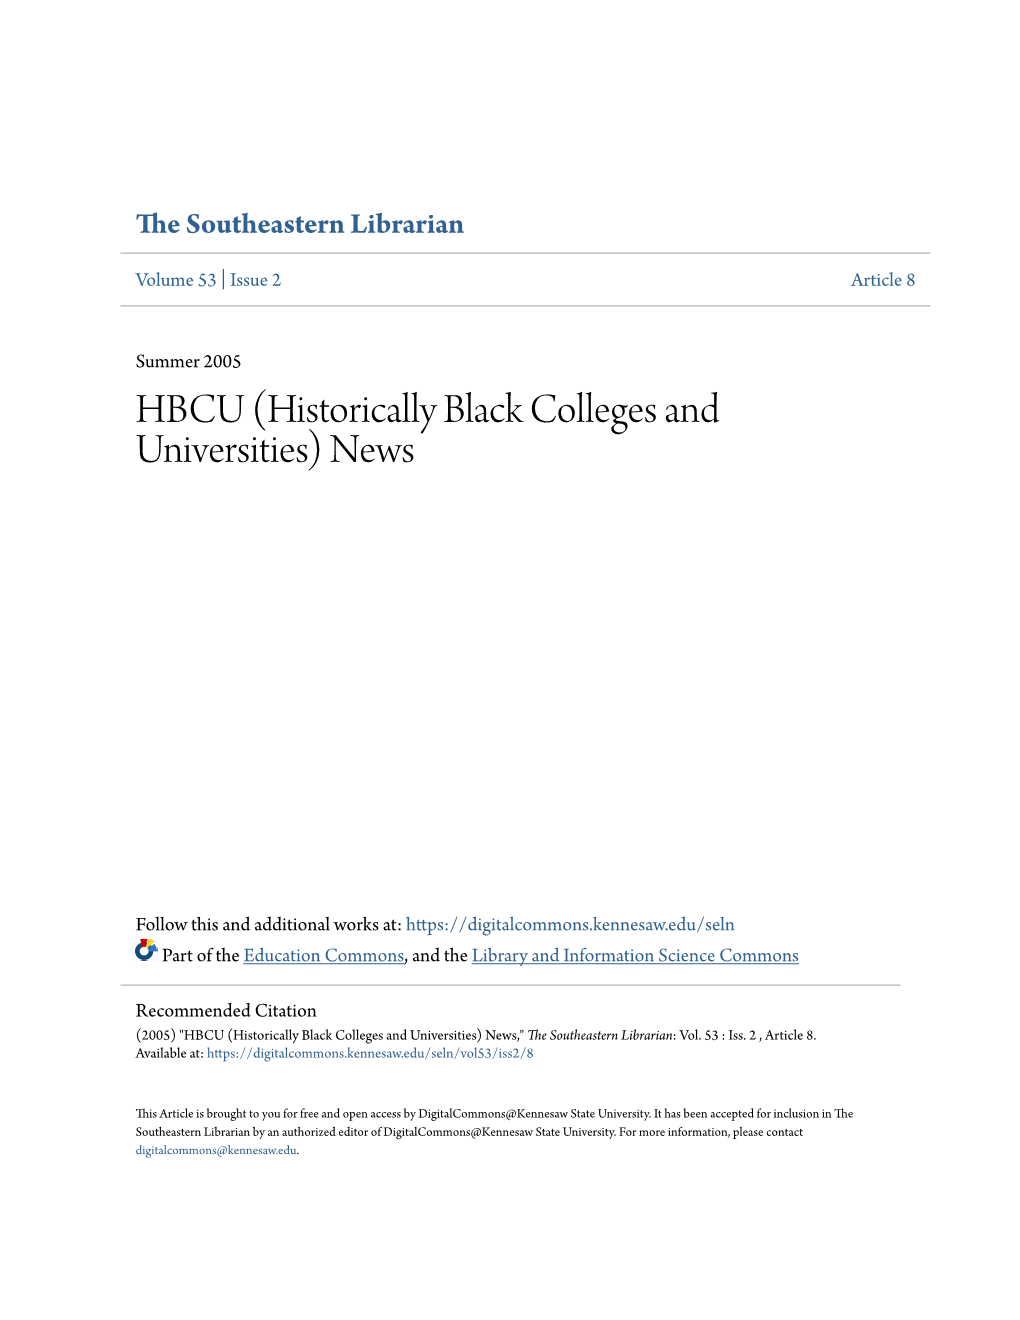 Historically Black Colleges and Universities) News